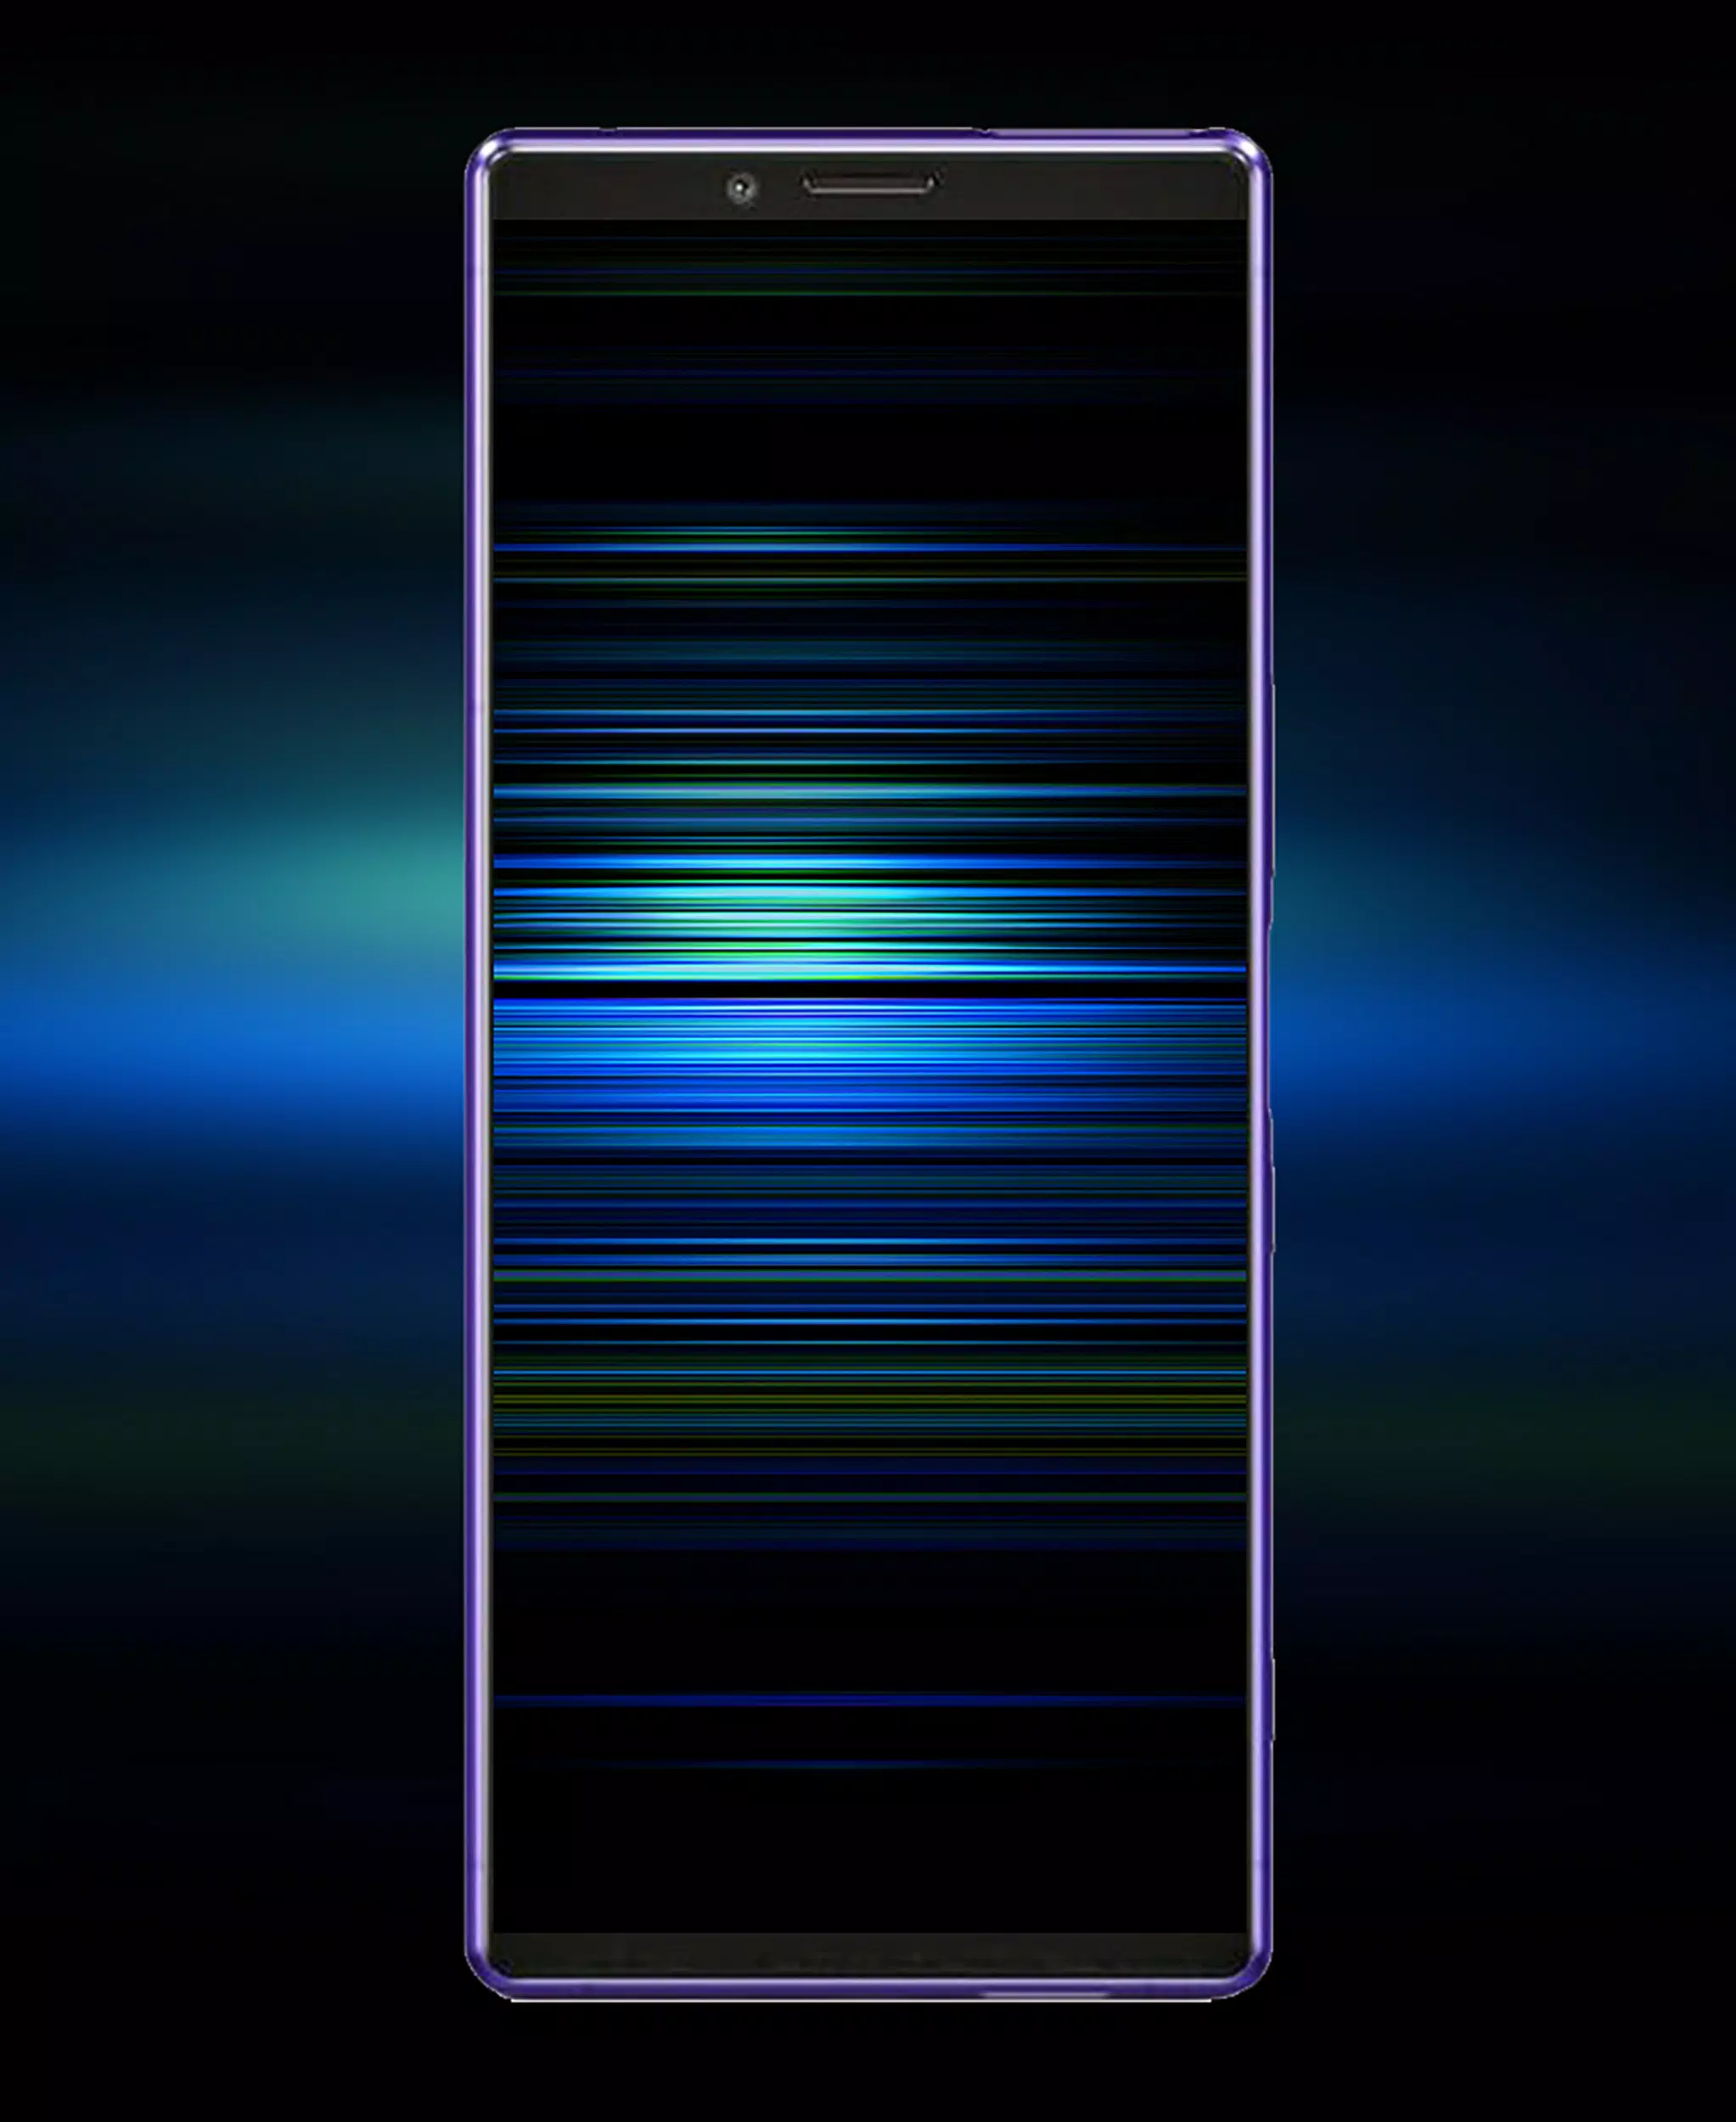 Xperia 1 Ii 5 Ii Wallpaper Apk For Android Download